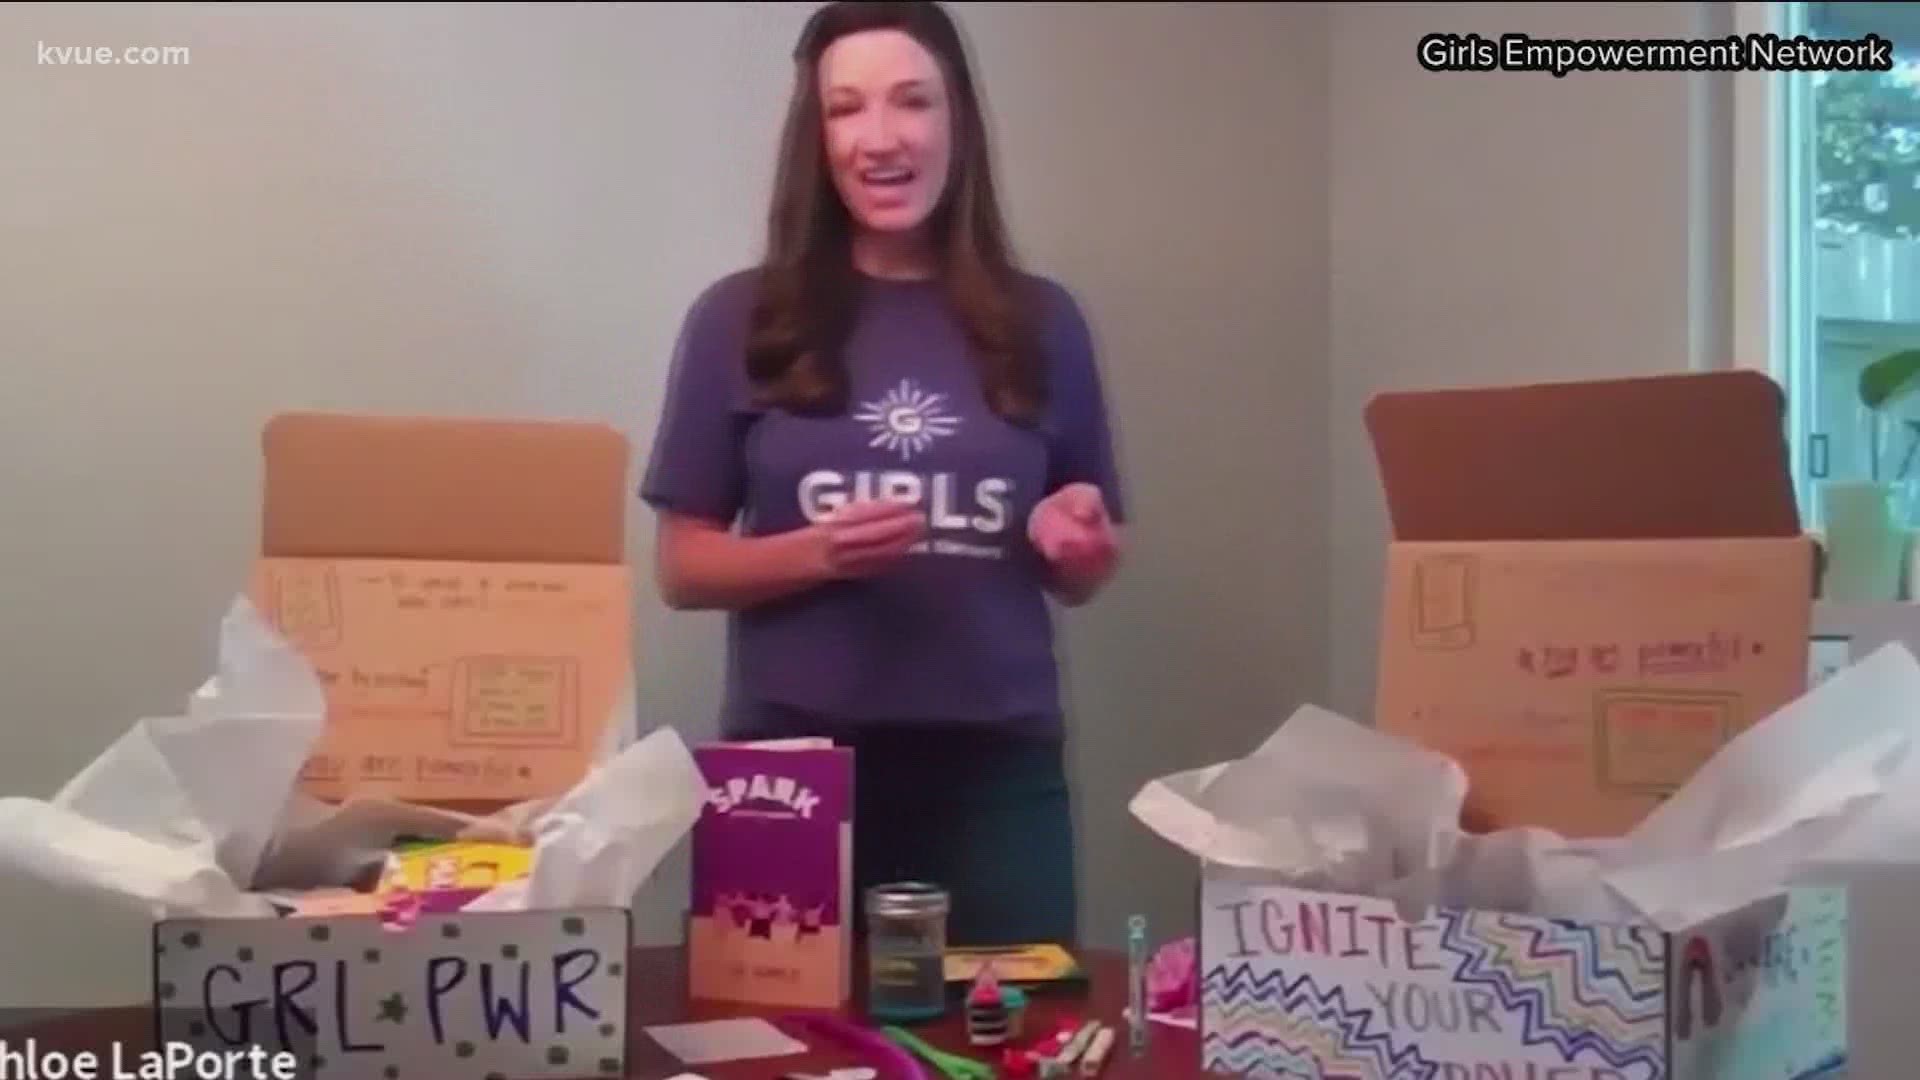 The Girls Empowerment Network is offering summer camp in a box. They're boxes full of activities so girls can learn and stay connected from their homes.